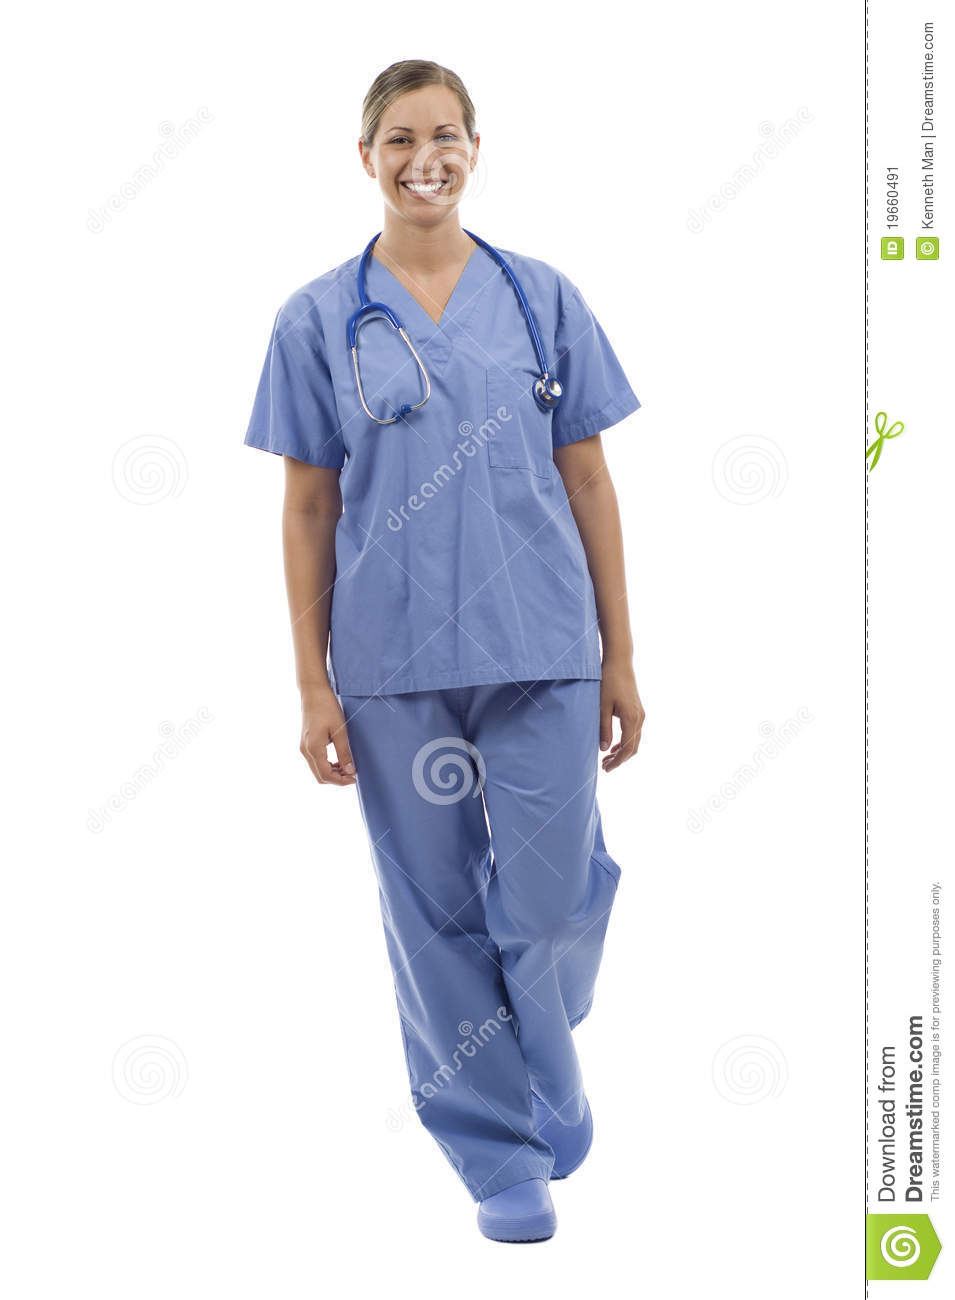 Female Health Care Worker Walking Towards The Camera Smiling Isolated